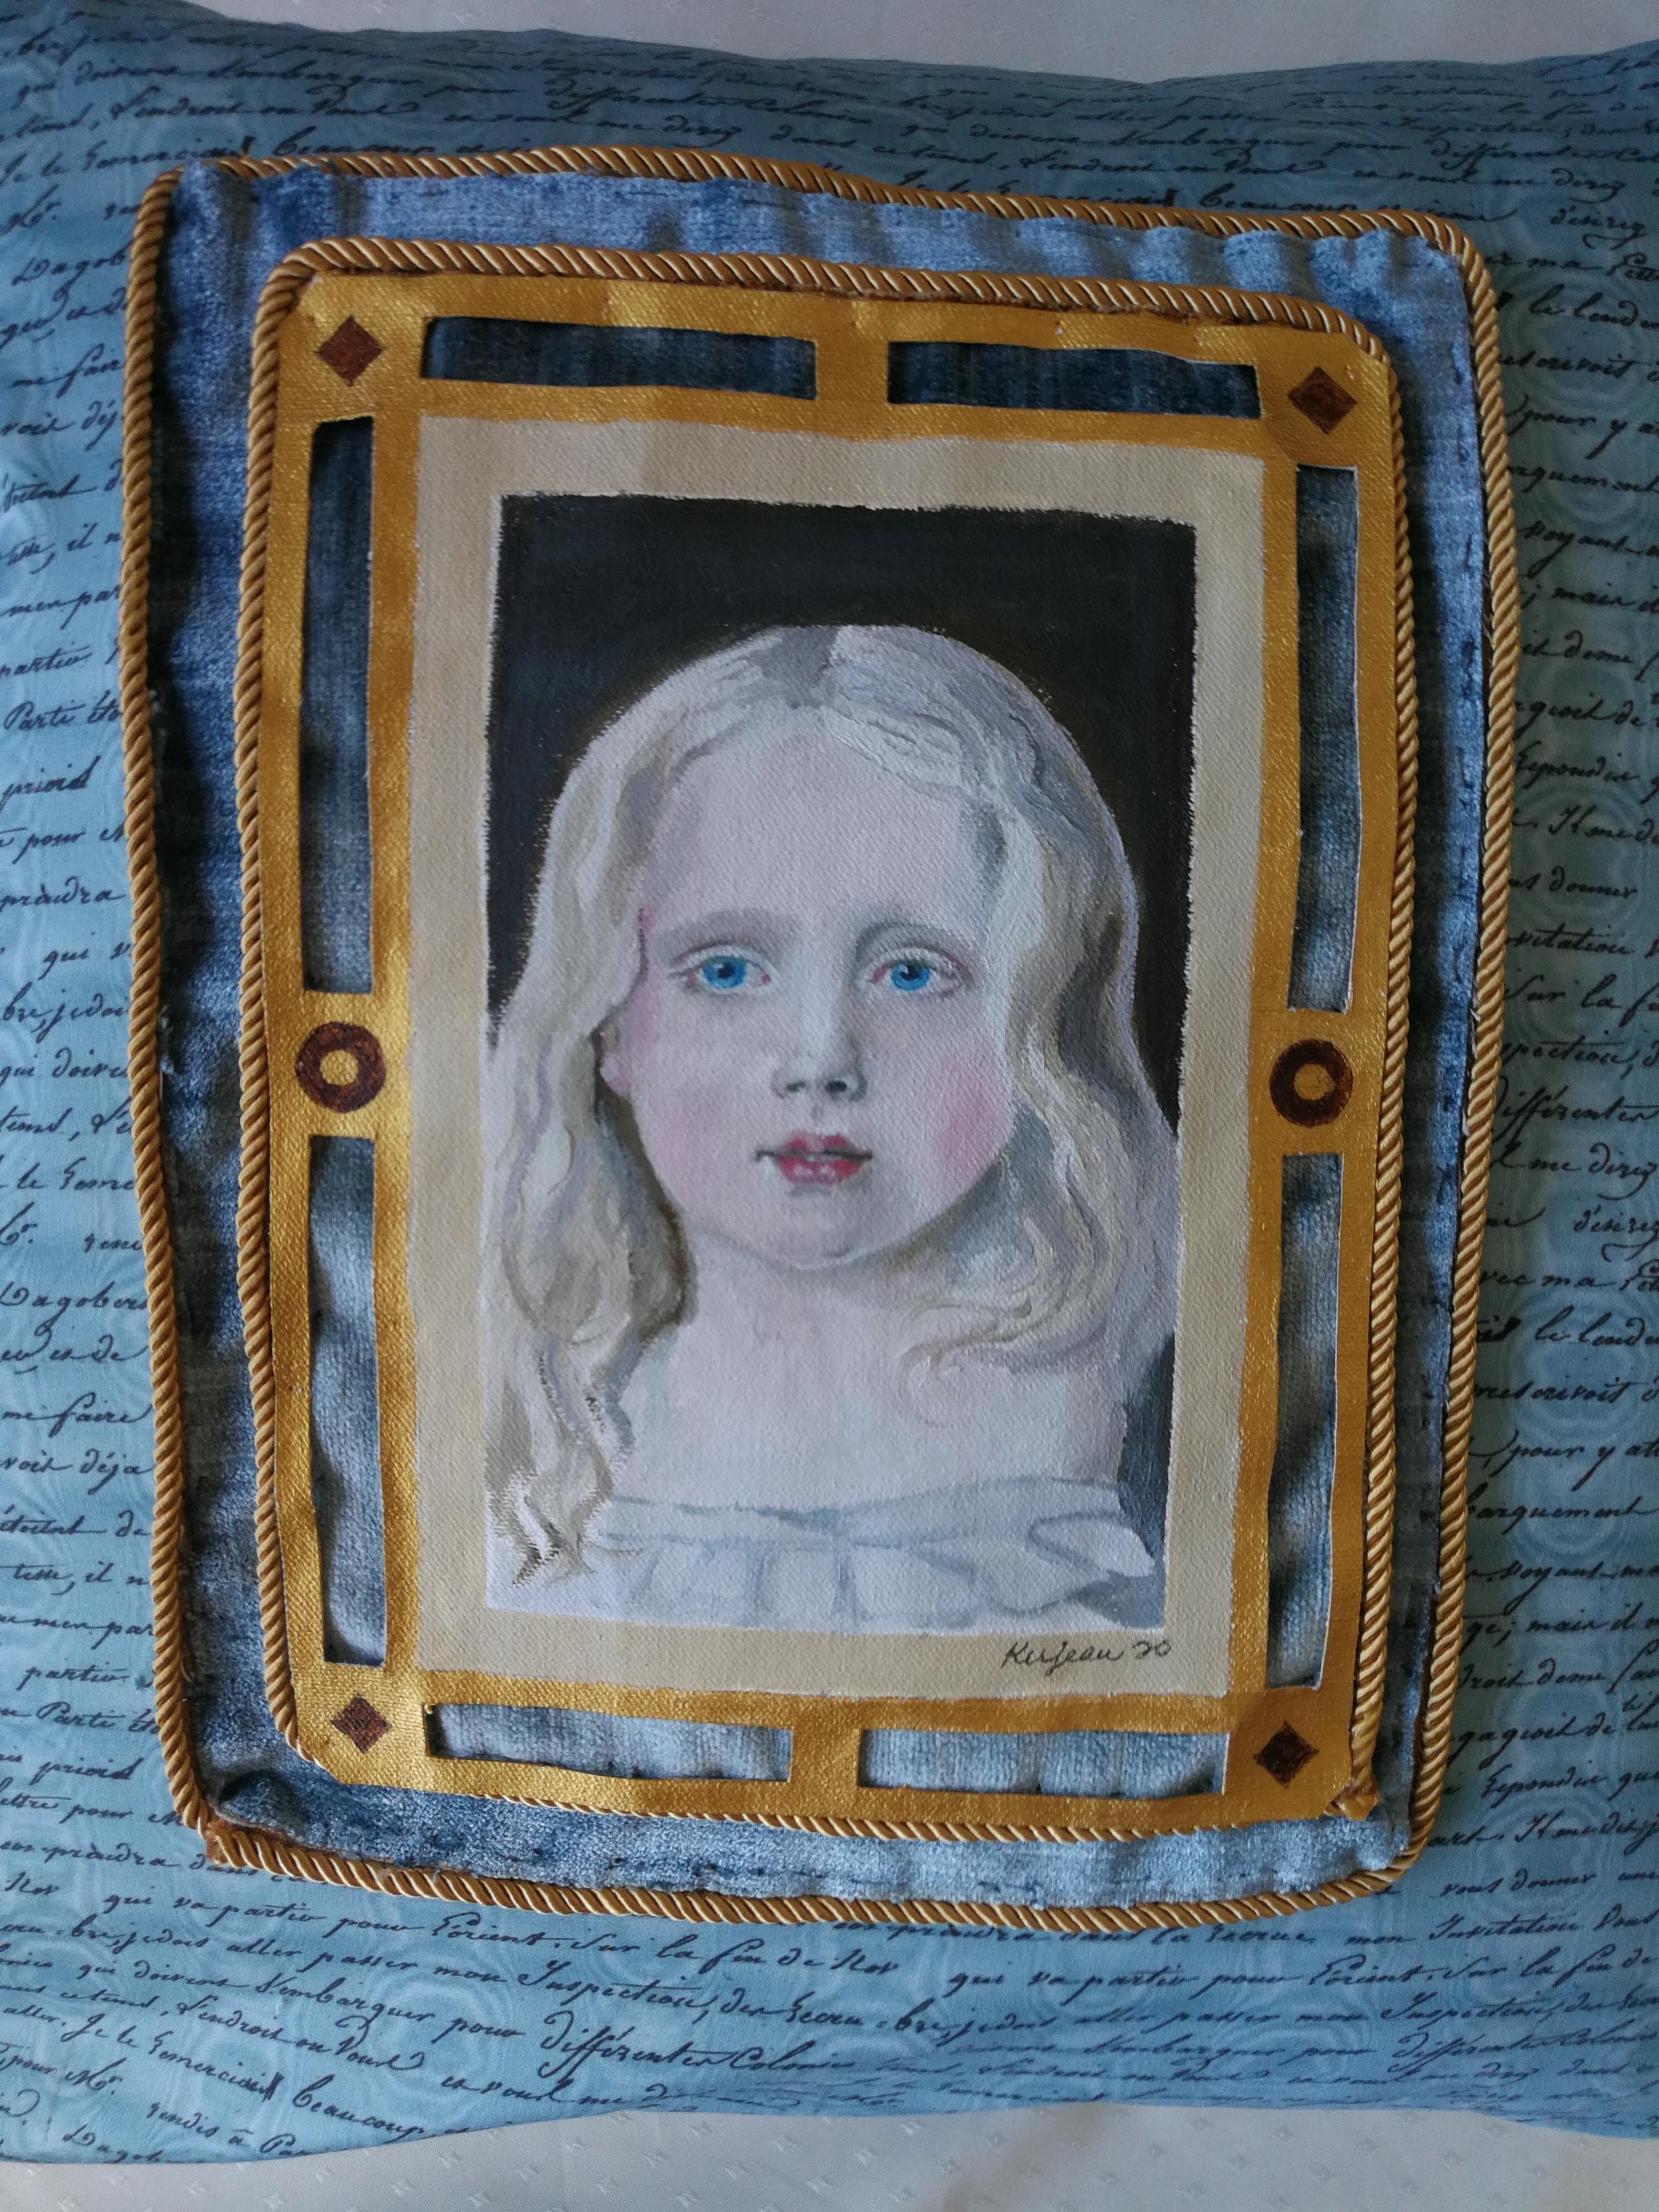 Child of the Enlightenment (Venetian Cushion)